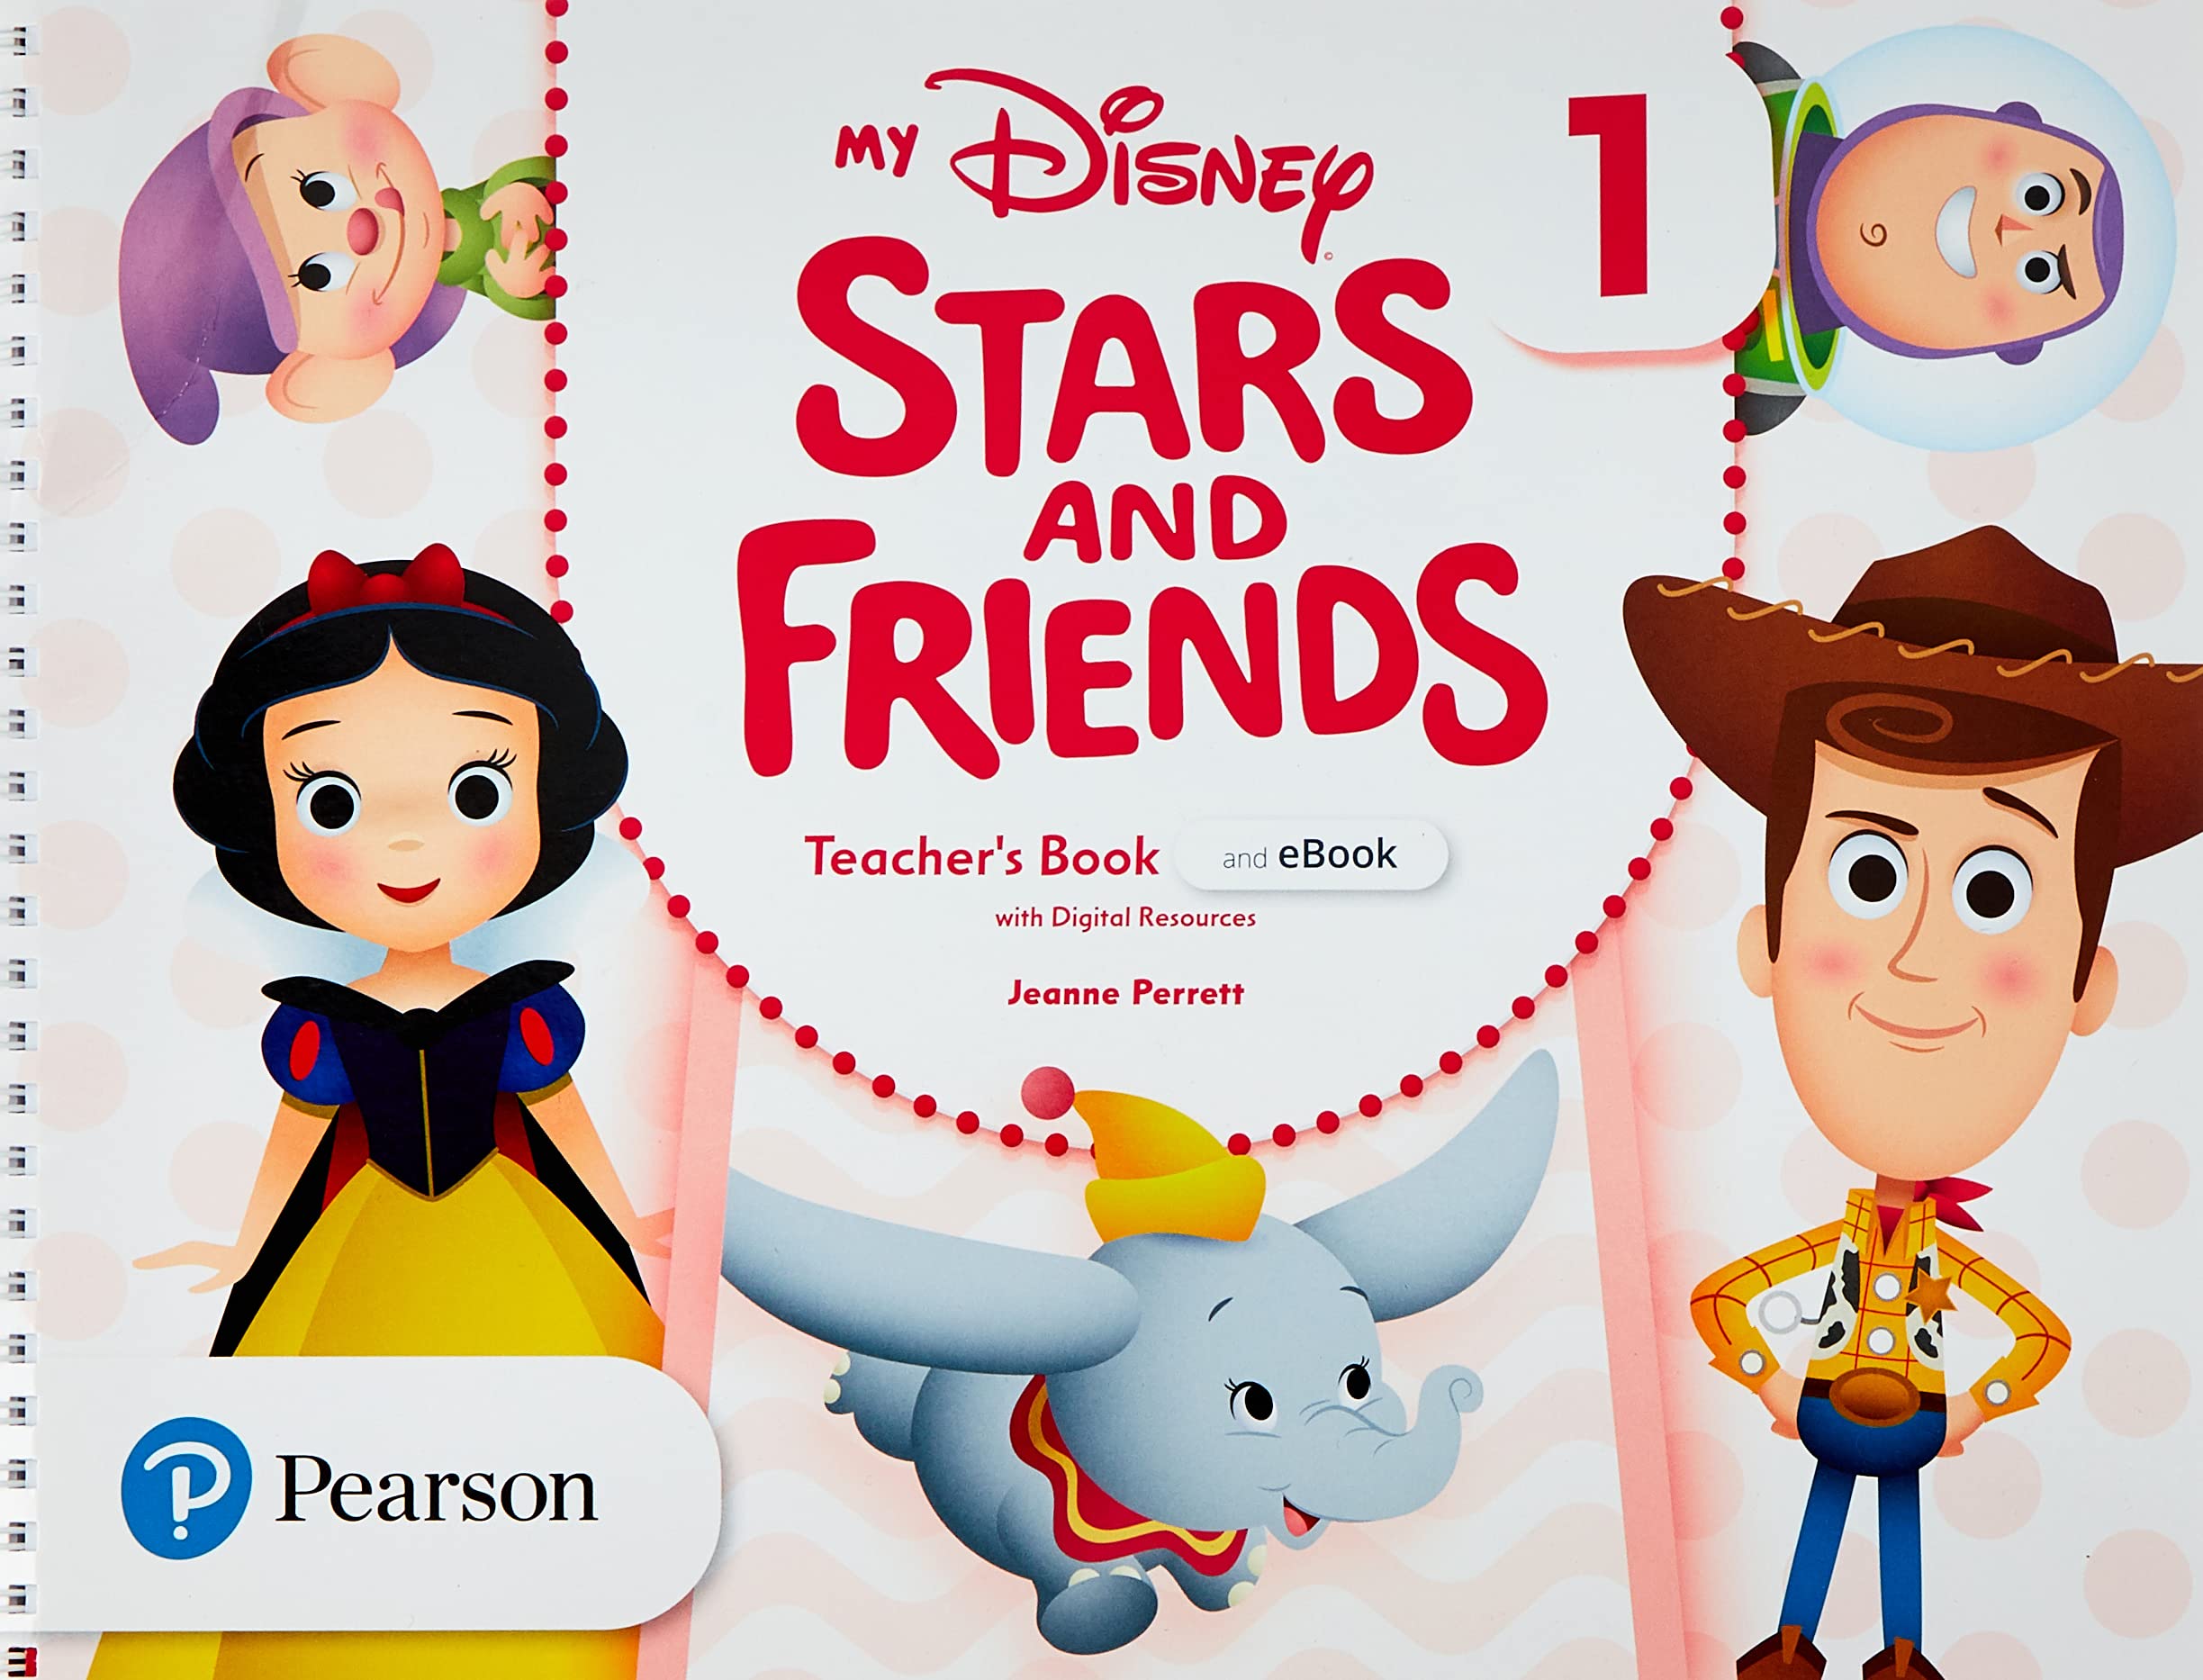 MY DISNEY STARS AND FRIENDS 1 Teacher's Book + eBook with digital resources